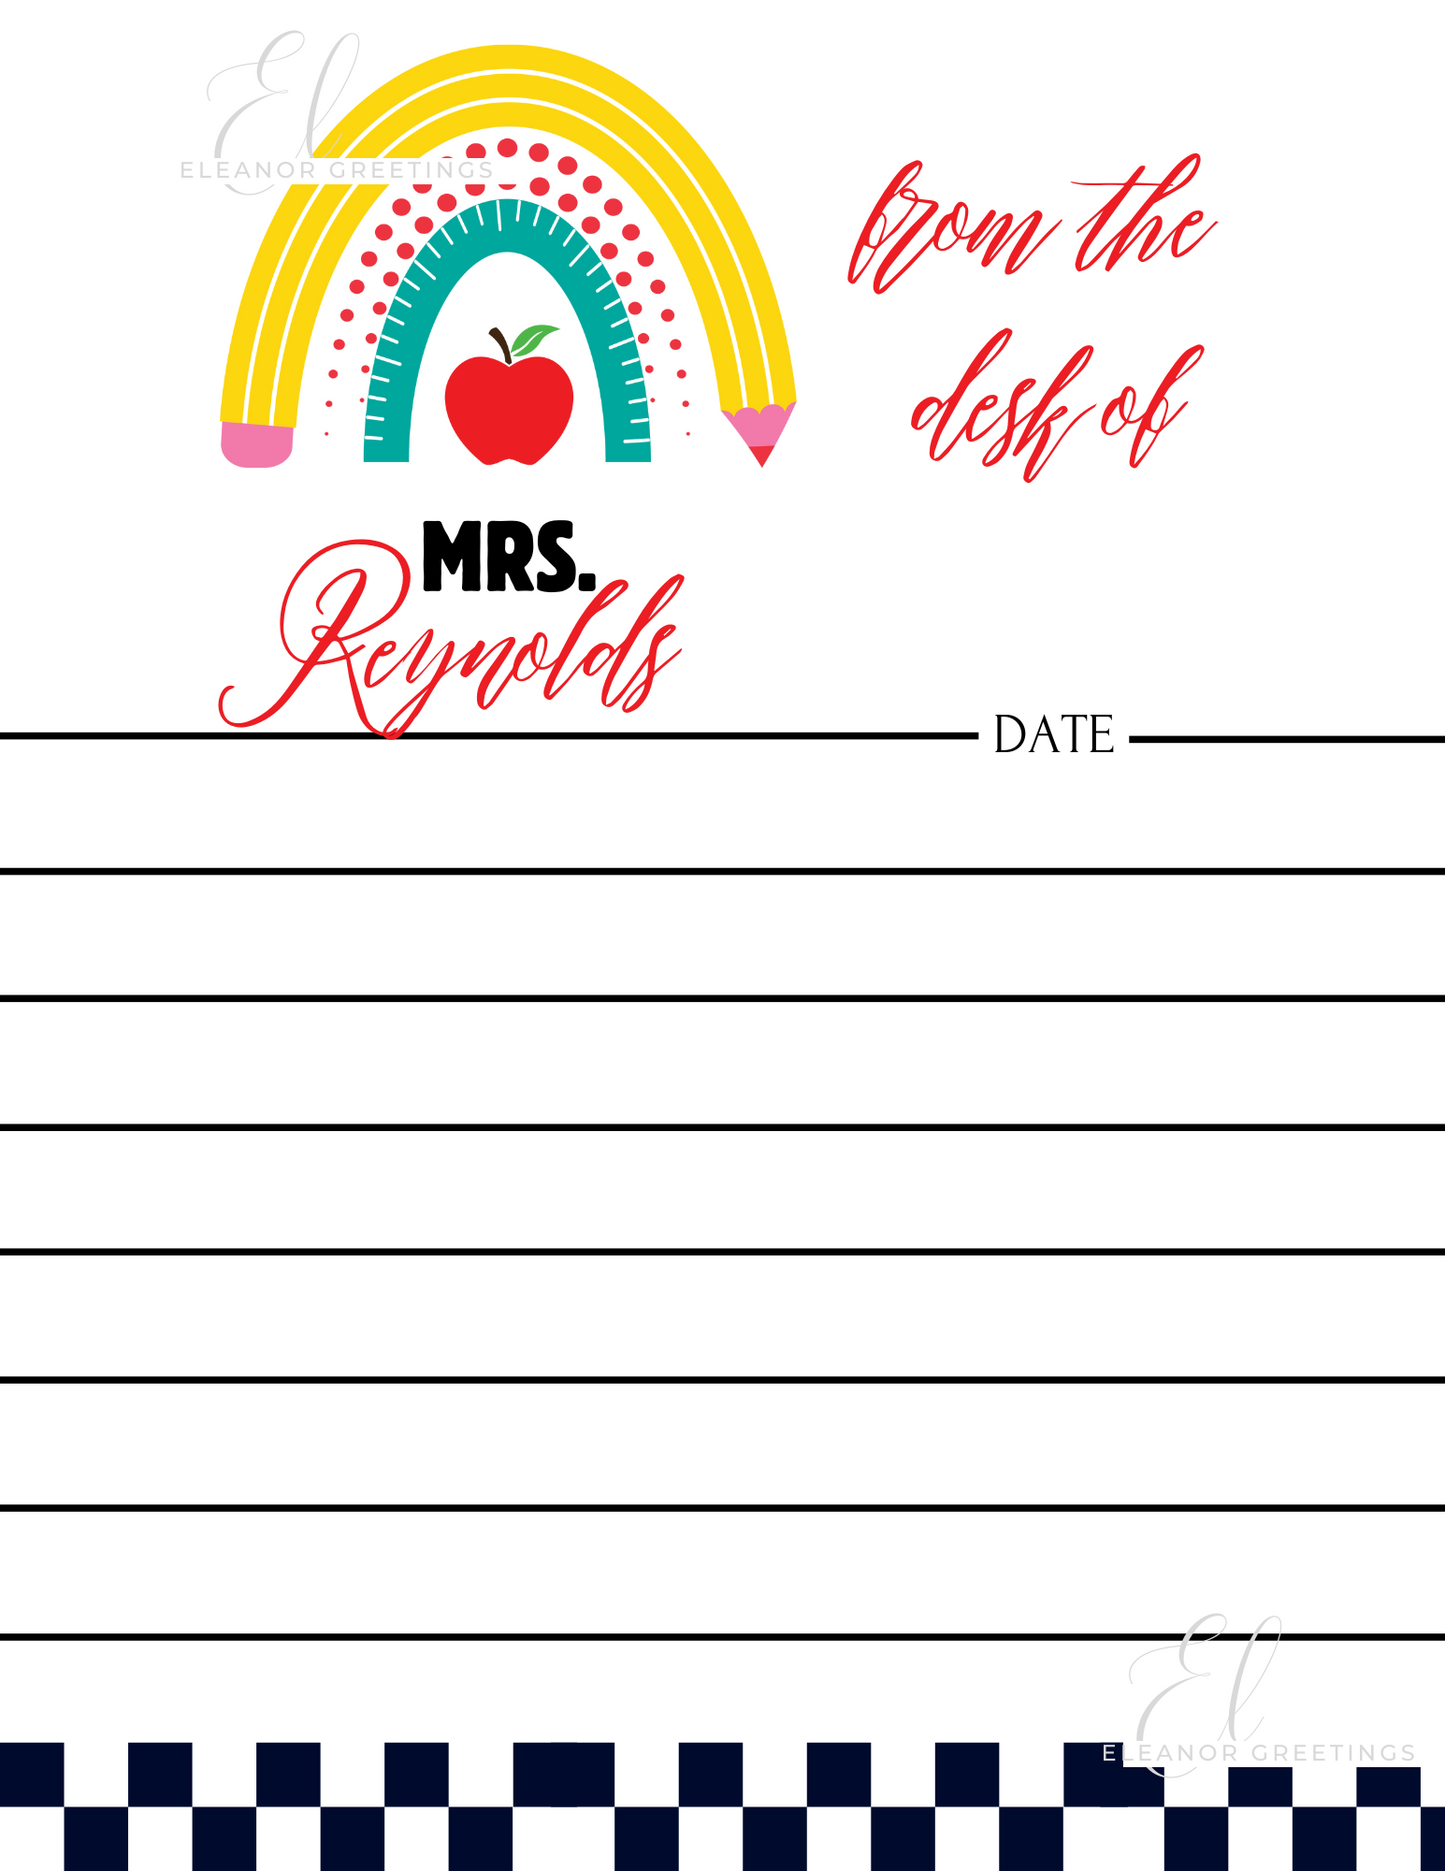 Ms./Mrs. from the Desk of Letterhead